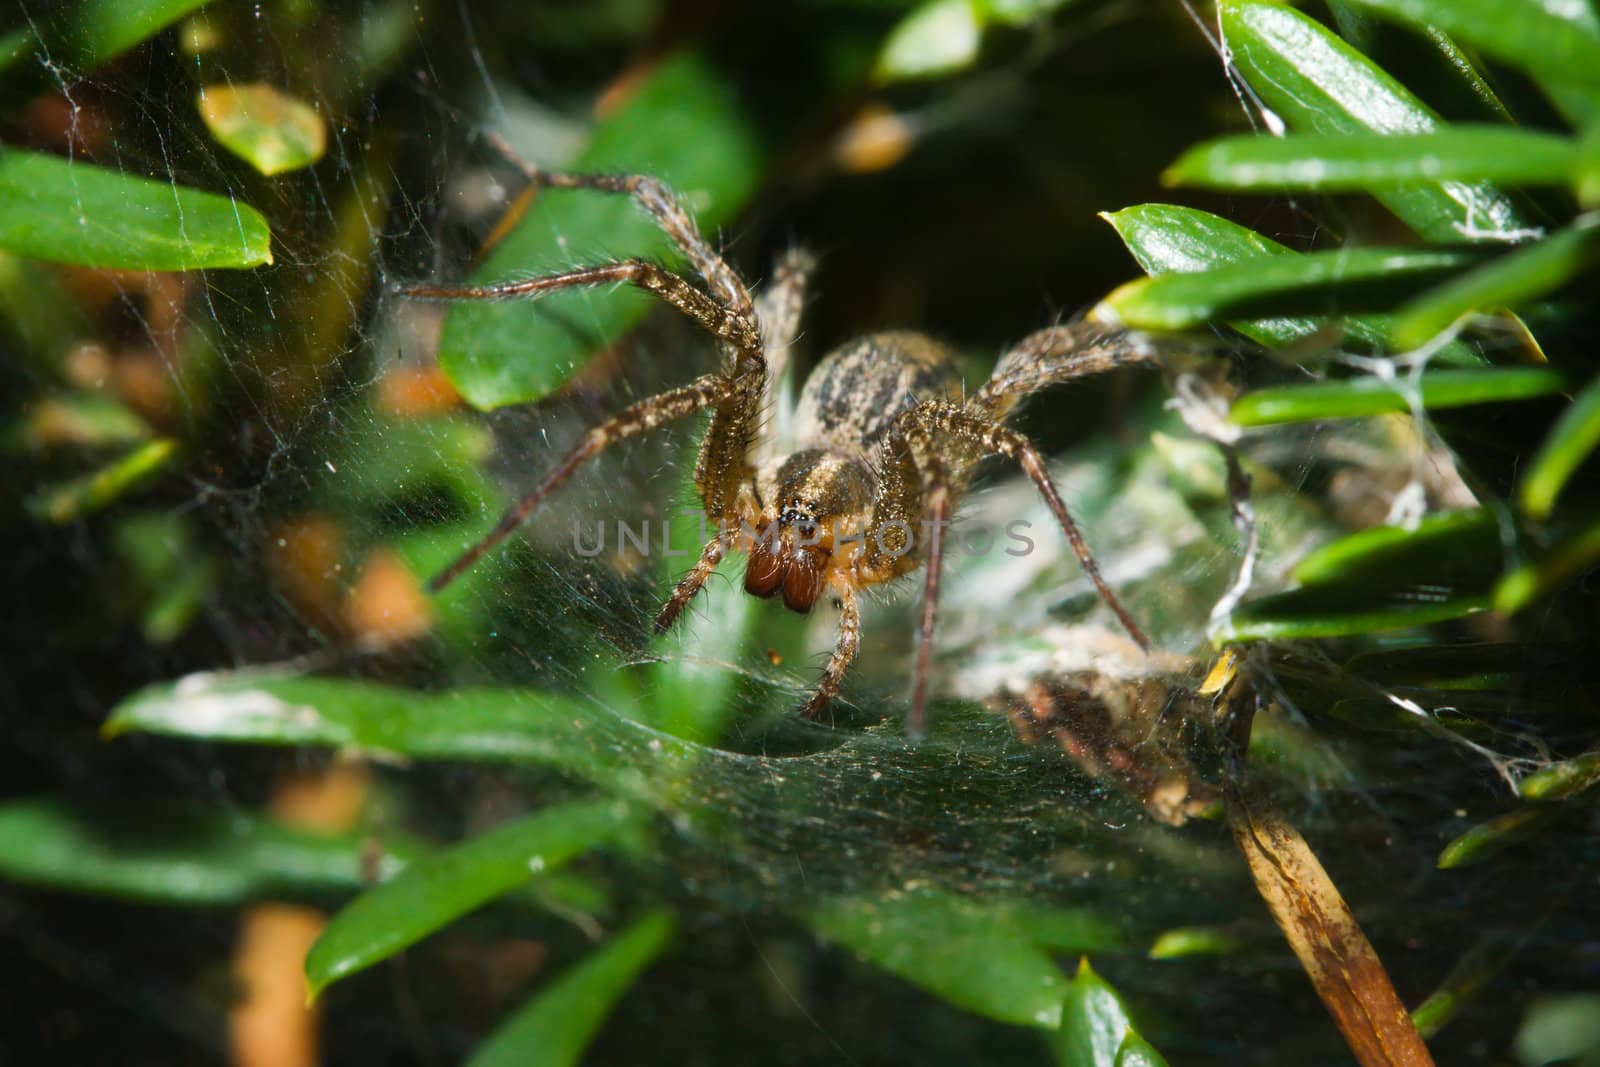 Garden Orb Spider working to keep his web in working condition.